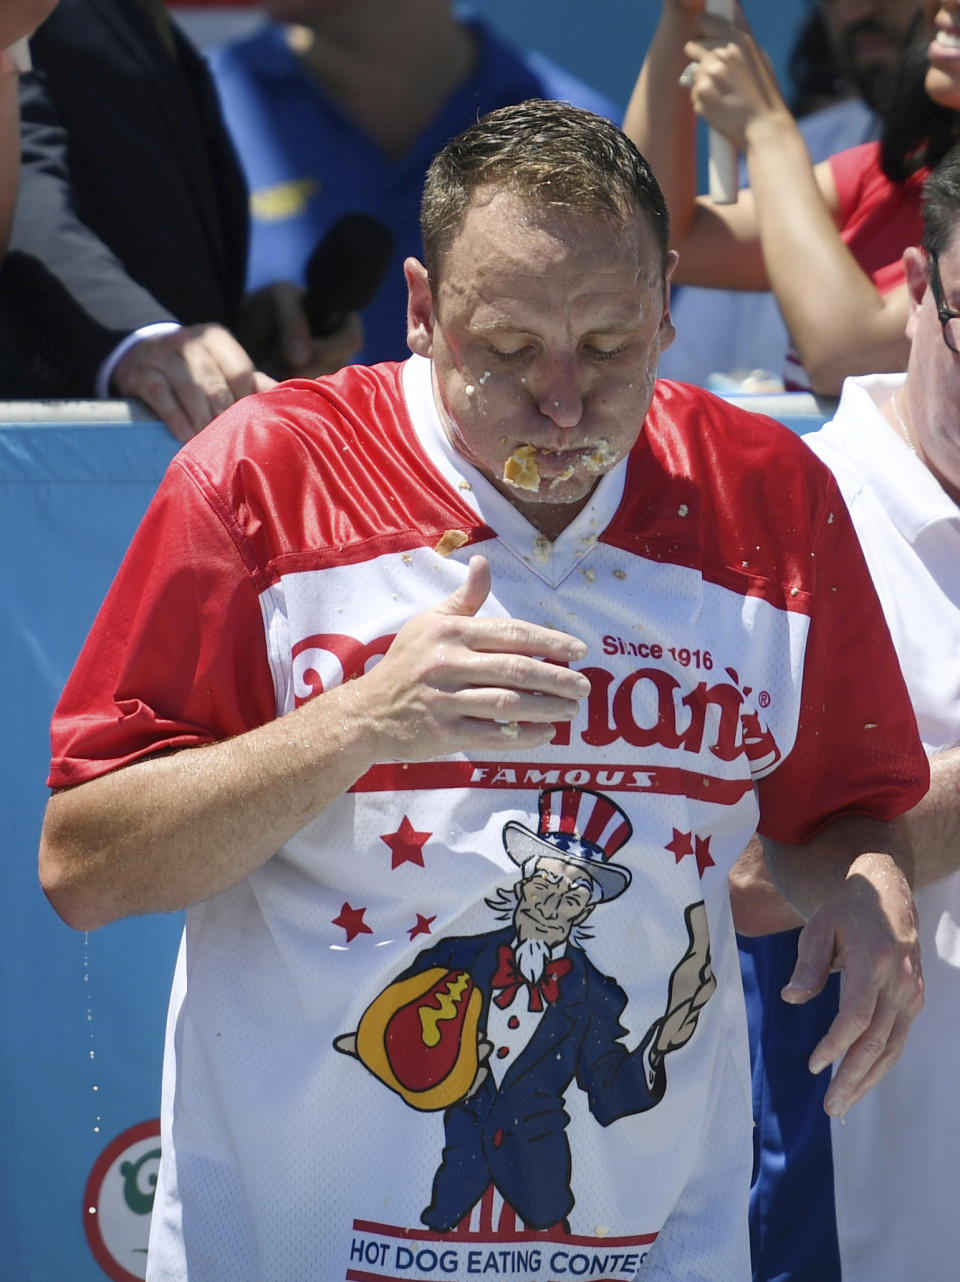 Joey Chestnut eats his 71st hot dog in the final seconds of the men's competition of Nathan's Famous July Fourth hot dog eating contest, Thursday, July 4, 2019, in New York's Coney Island. (AP Photo/Sarah Stier)